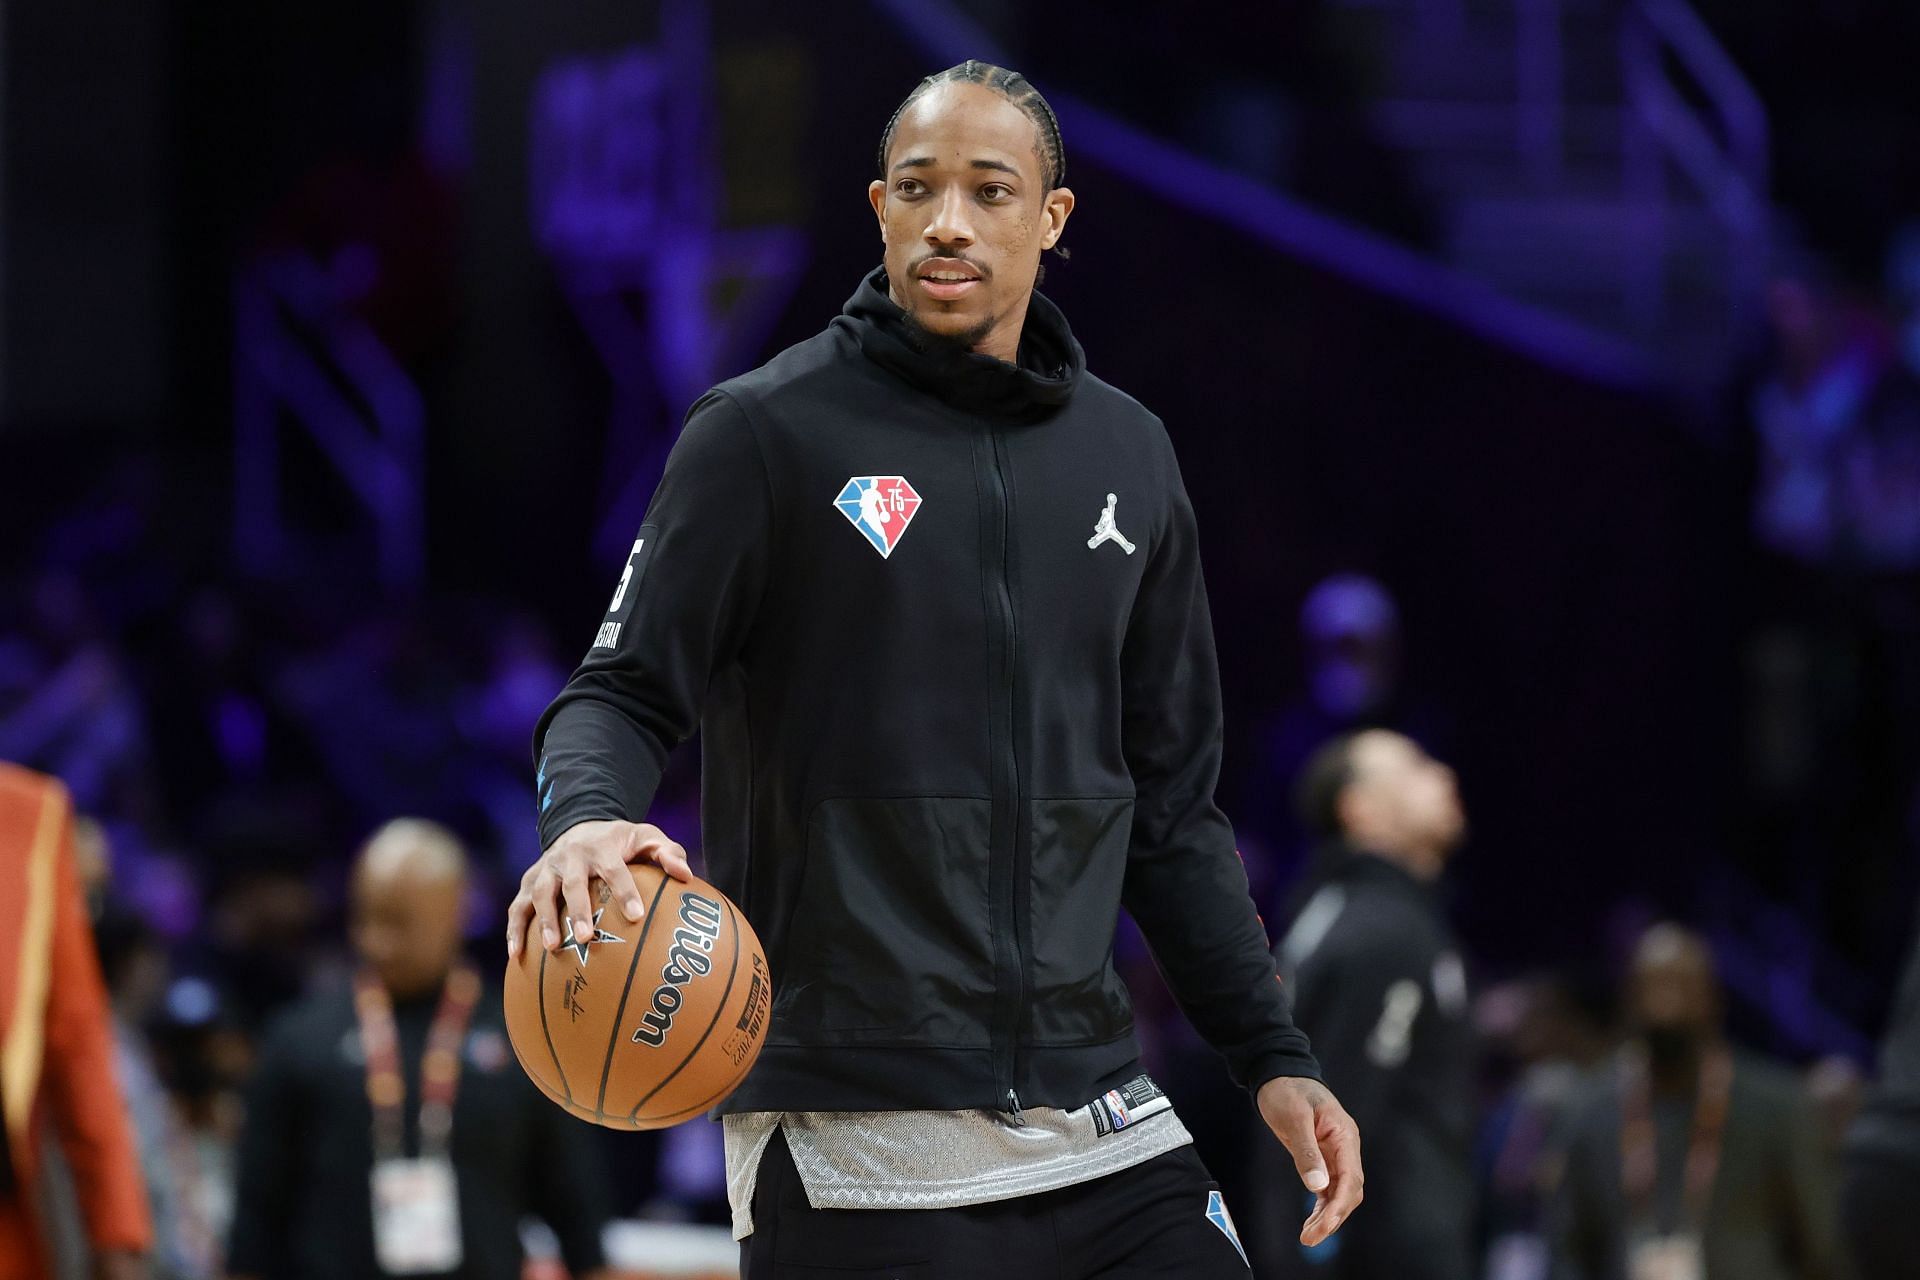 DeMar DeRozan #11 of Team LeBron warms up before the 2022 NBA All-Star Game